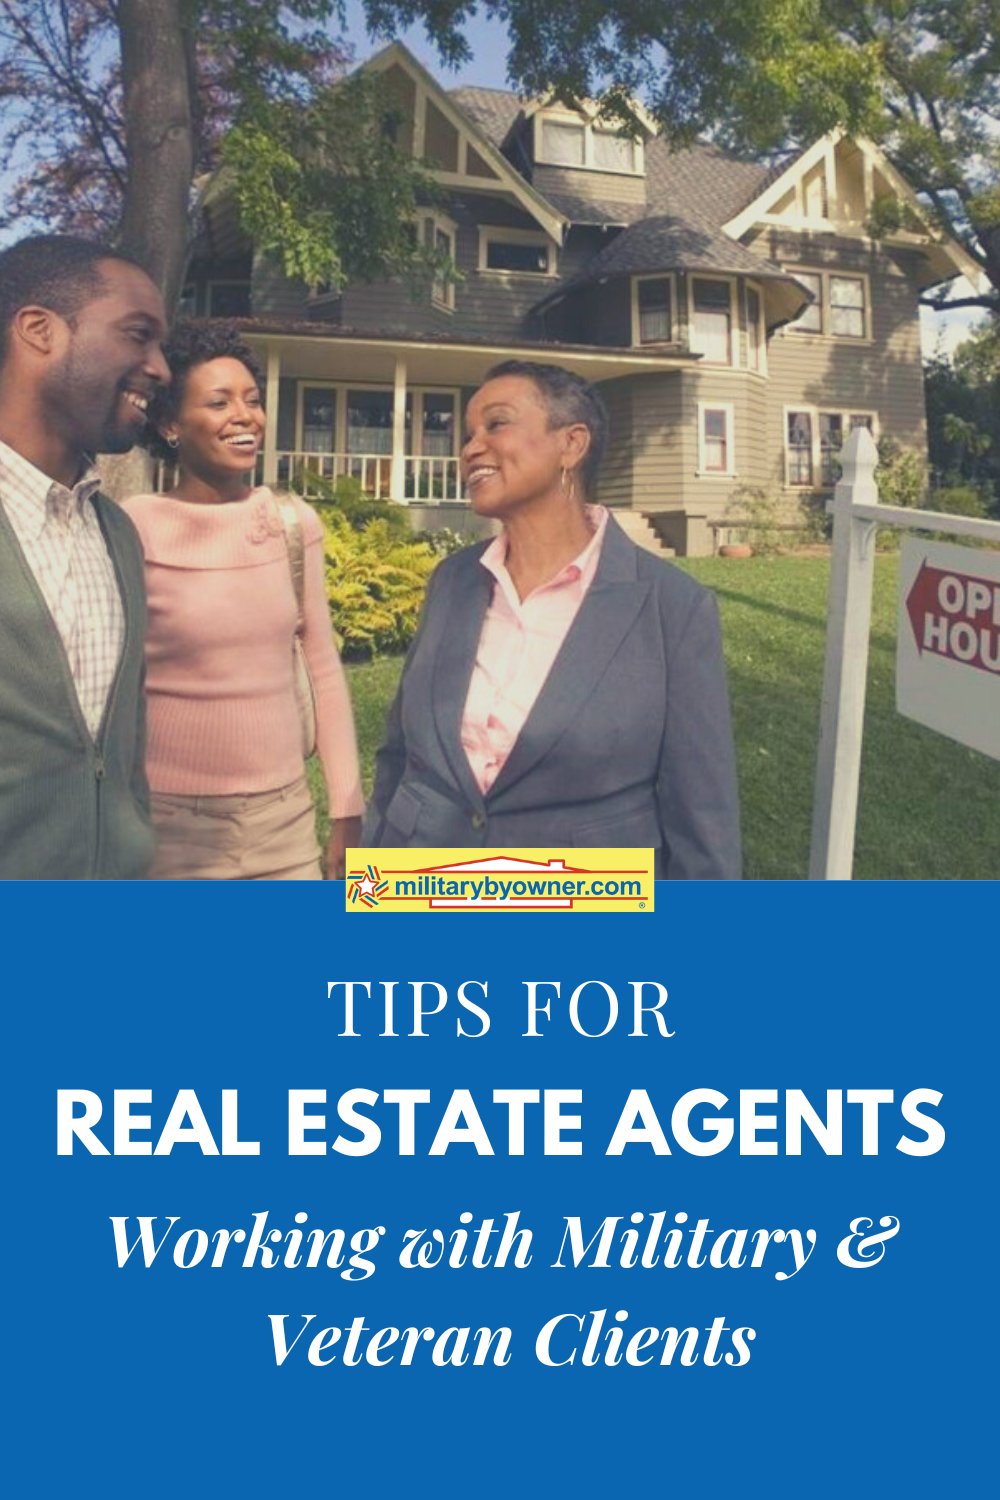 Tips_for_Real_Estate_Agents_Working_with_Military_and_Veterans